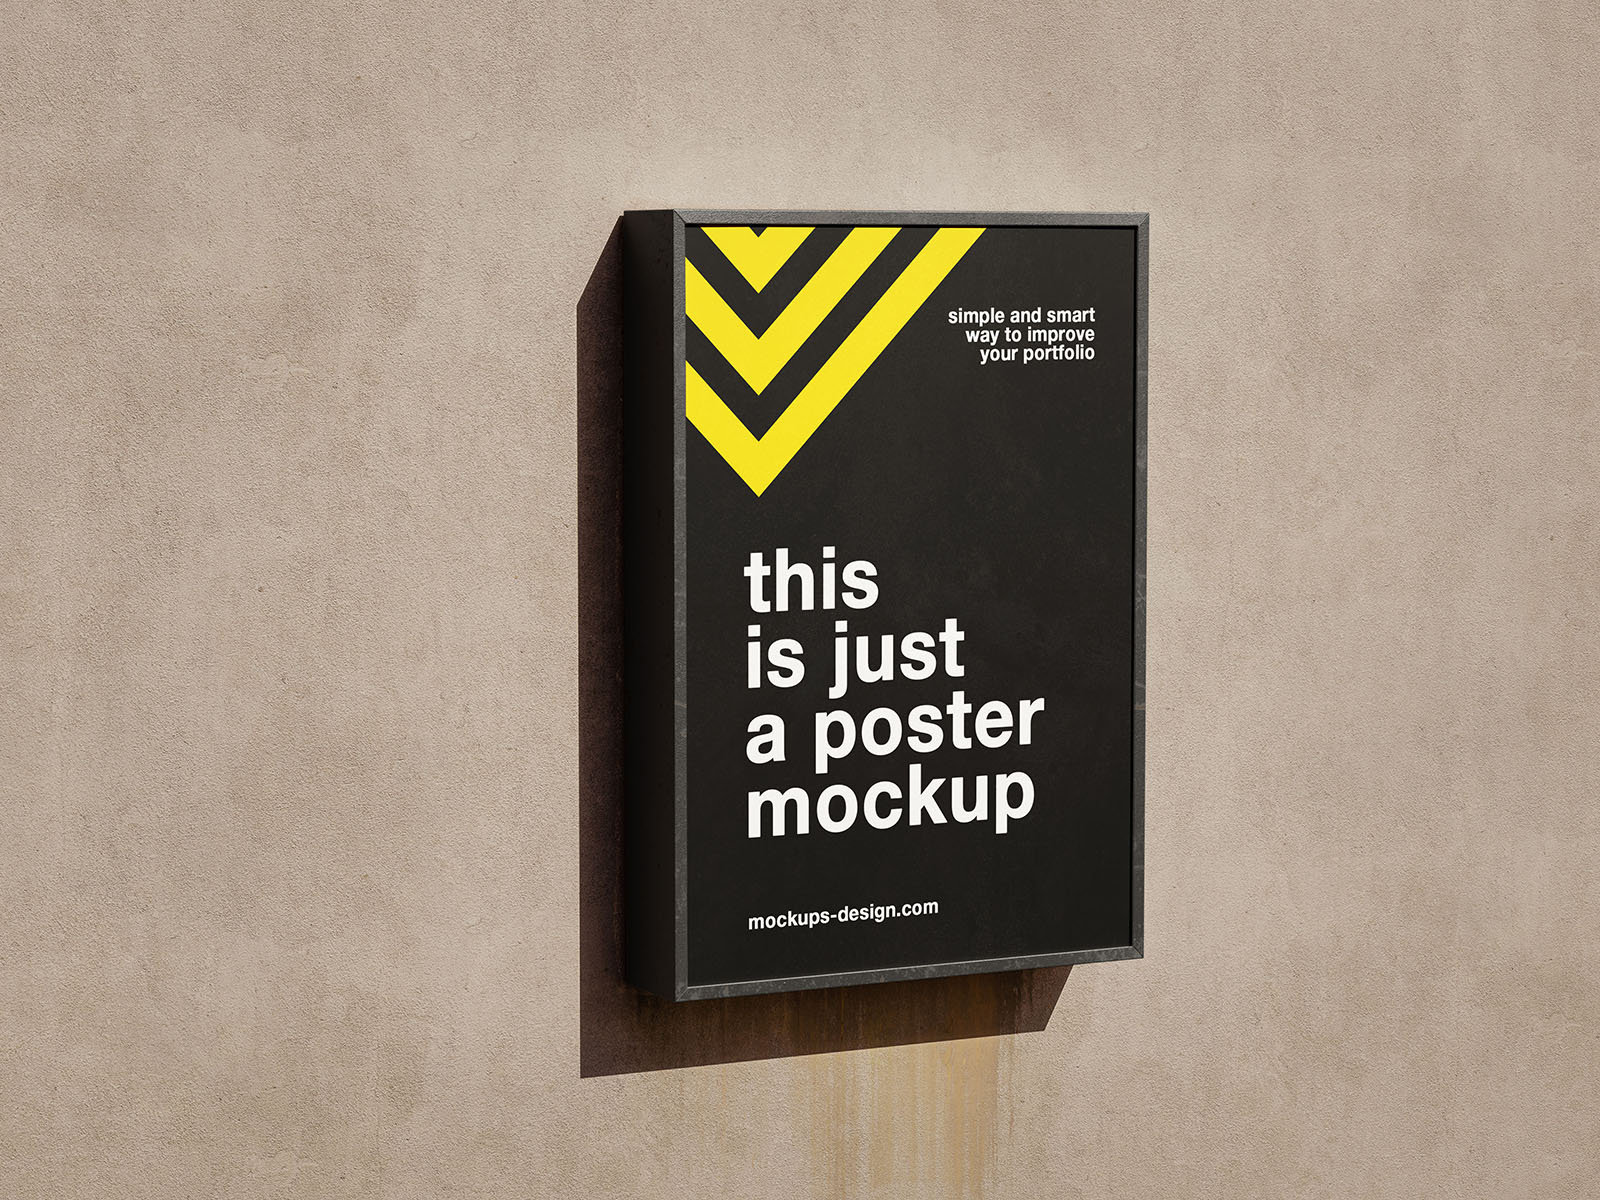 5 Sights of Poster Frames Mockup on the Wall (FREE) - Resource Boy